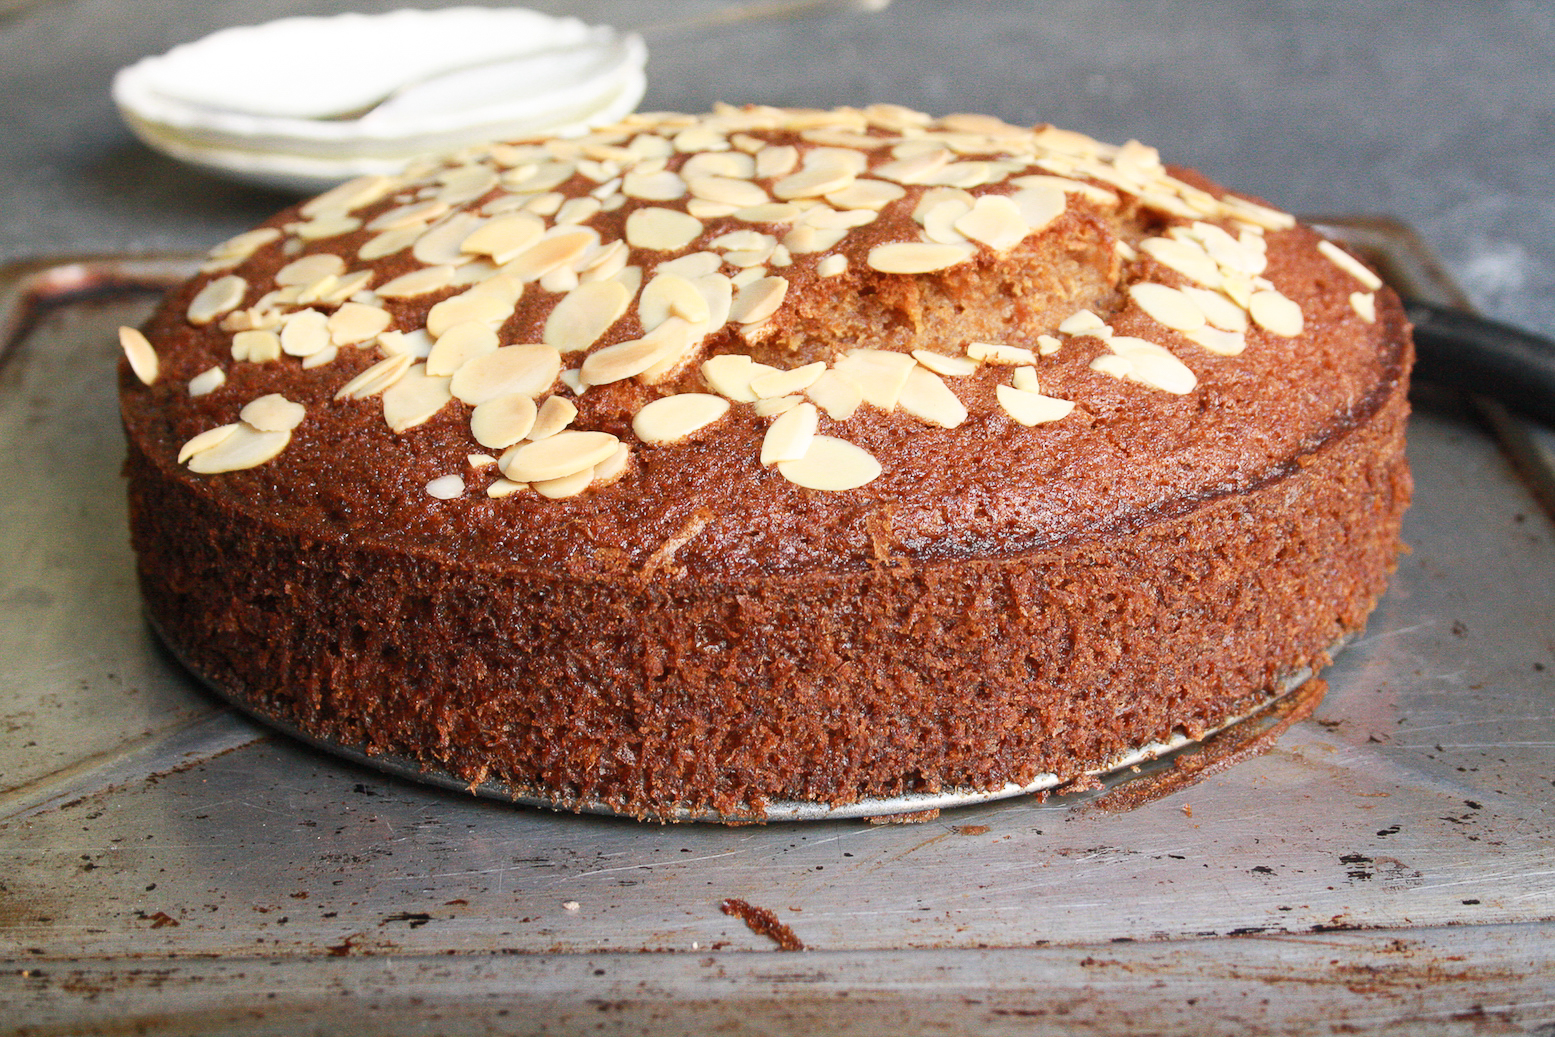 A super moist carrot cake filled with all sorts of warming winter spices for a classic addition to your festive table!